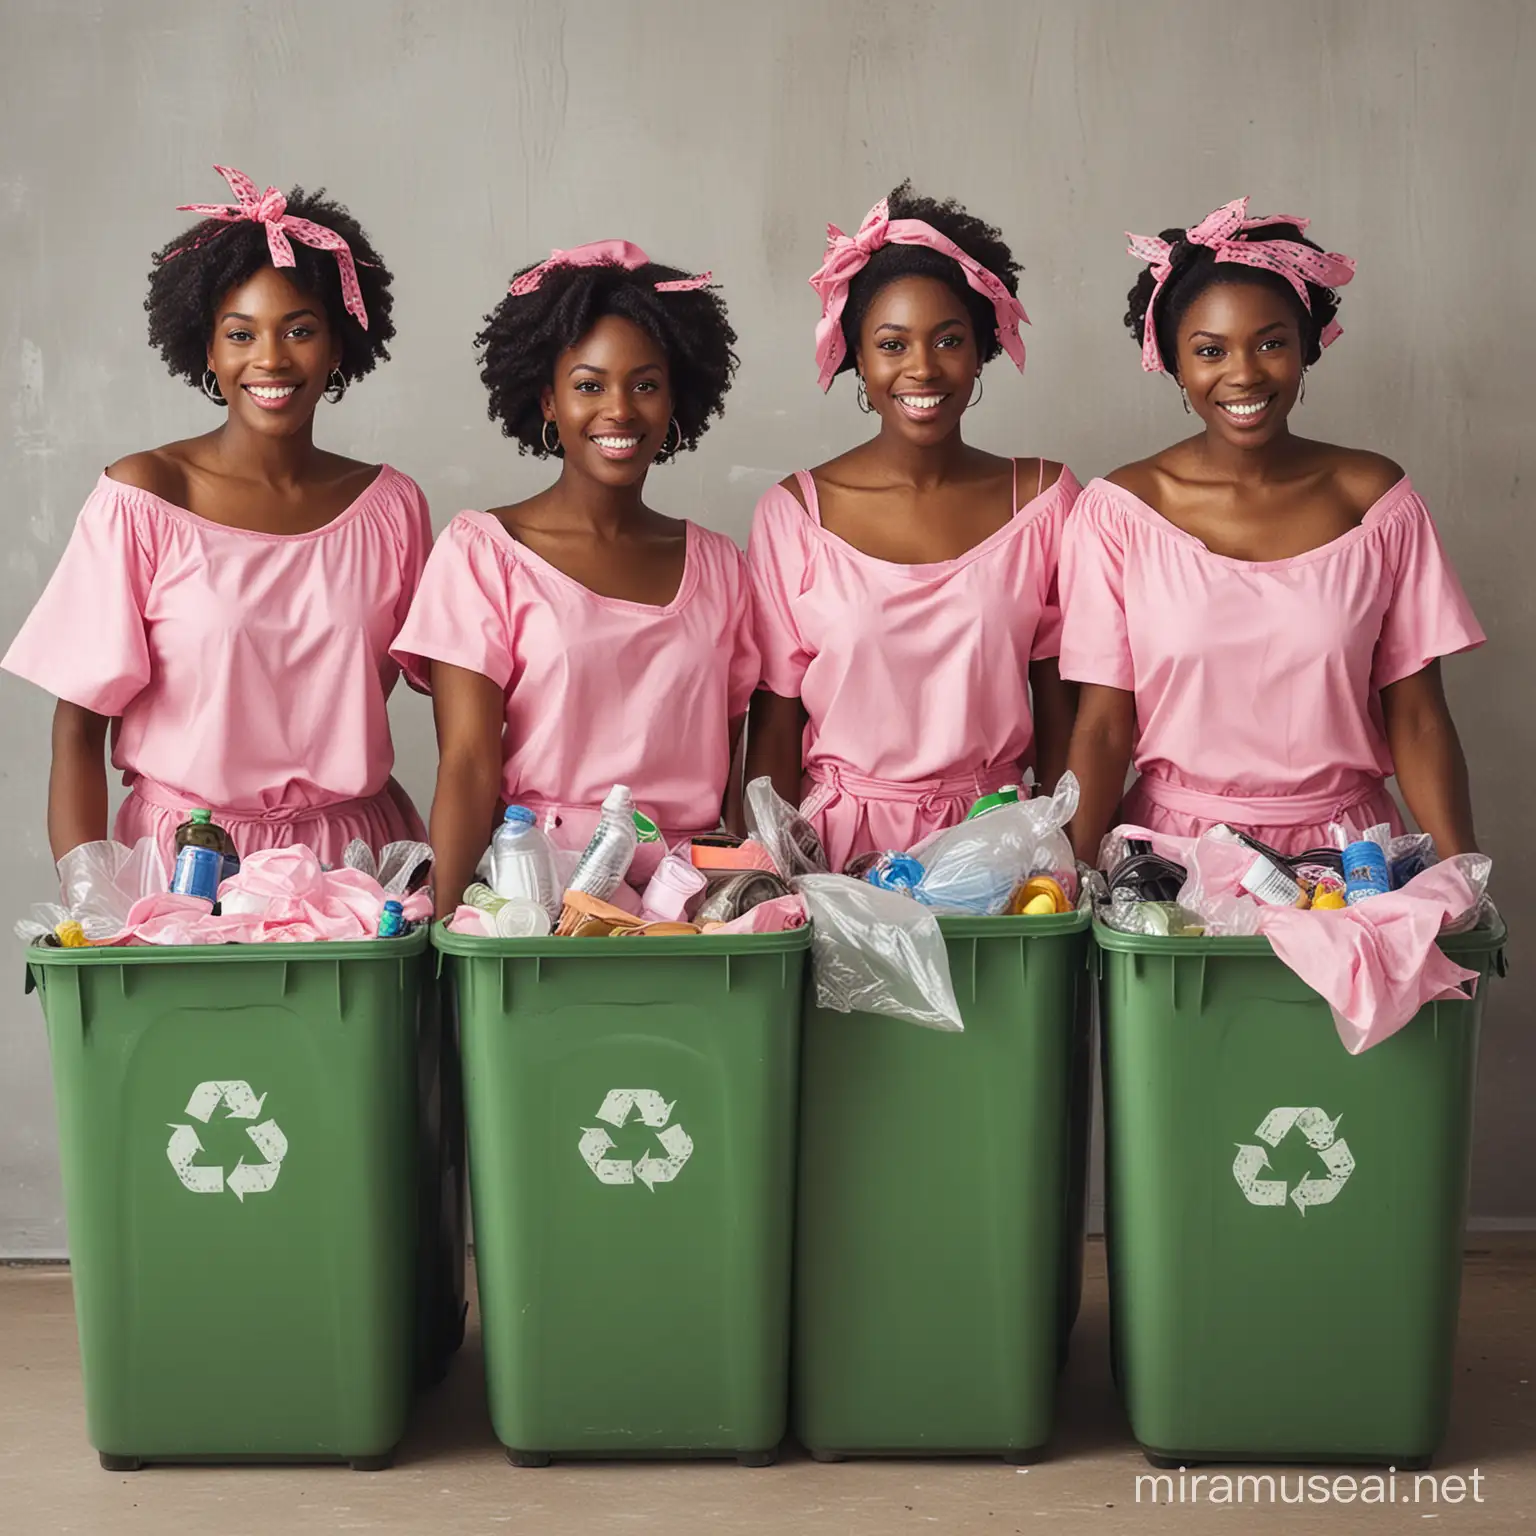 EcoChic Black Ladies Promoting Recycling in Vibrant Pink and Green